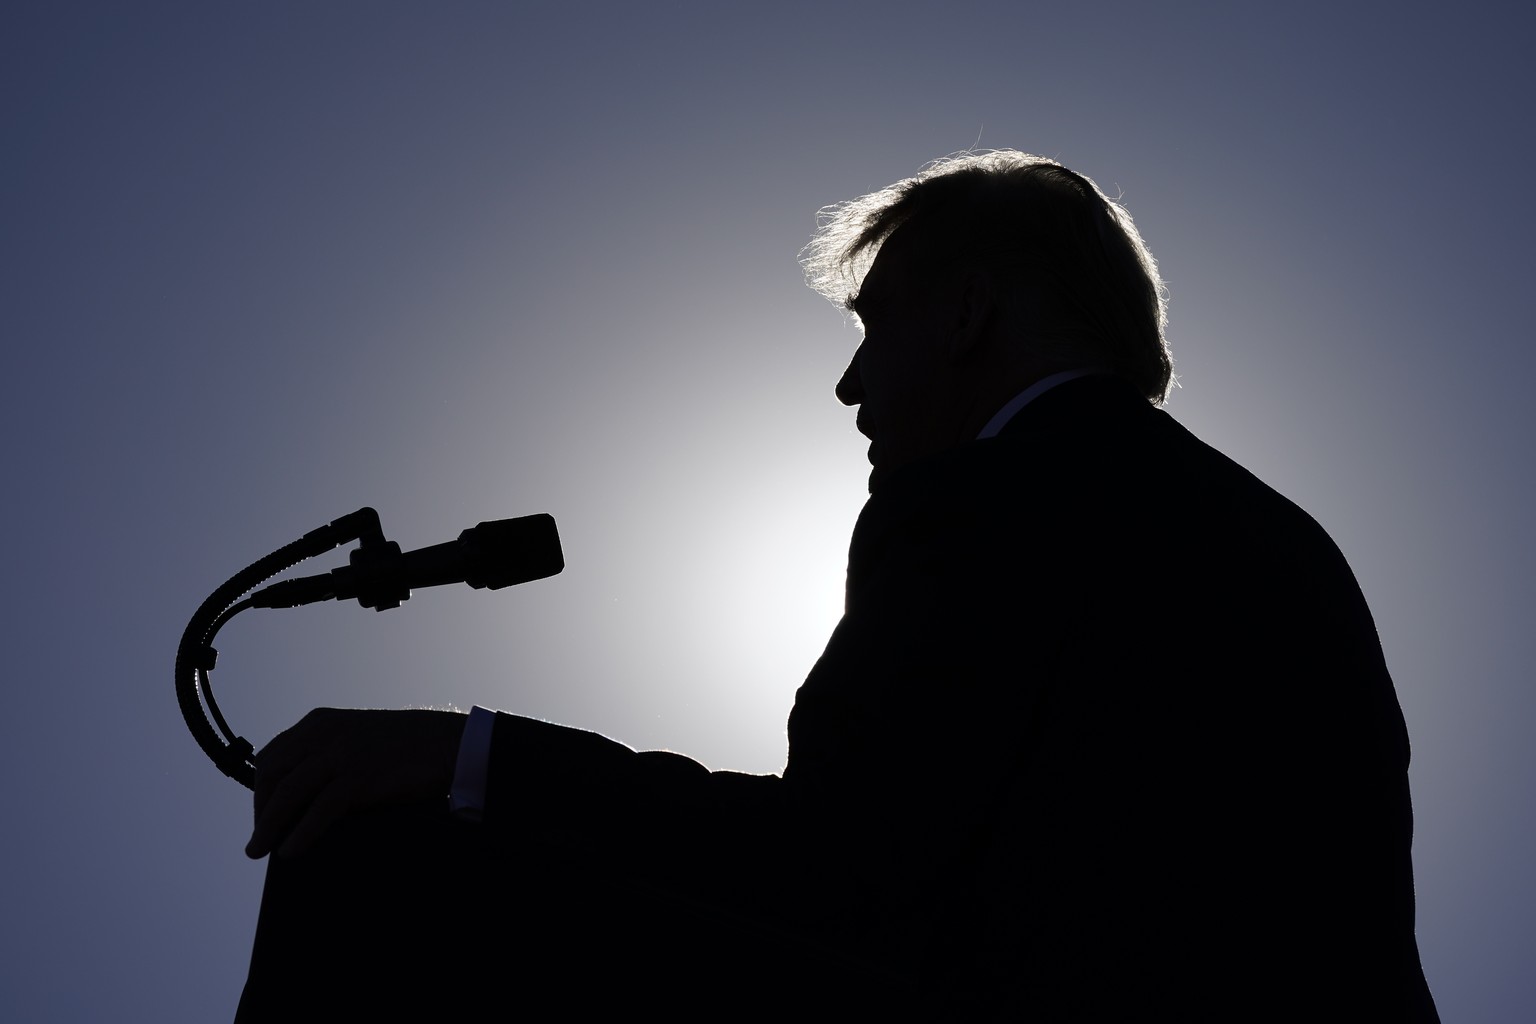 President Donald Trump speaks at a campaign rally at Carson City Airport, Sunday, Oct. 18, 2020, in Carson City, Nev. (AP Photo/Alex Brandon)
Donald Trump